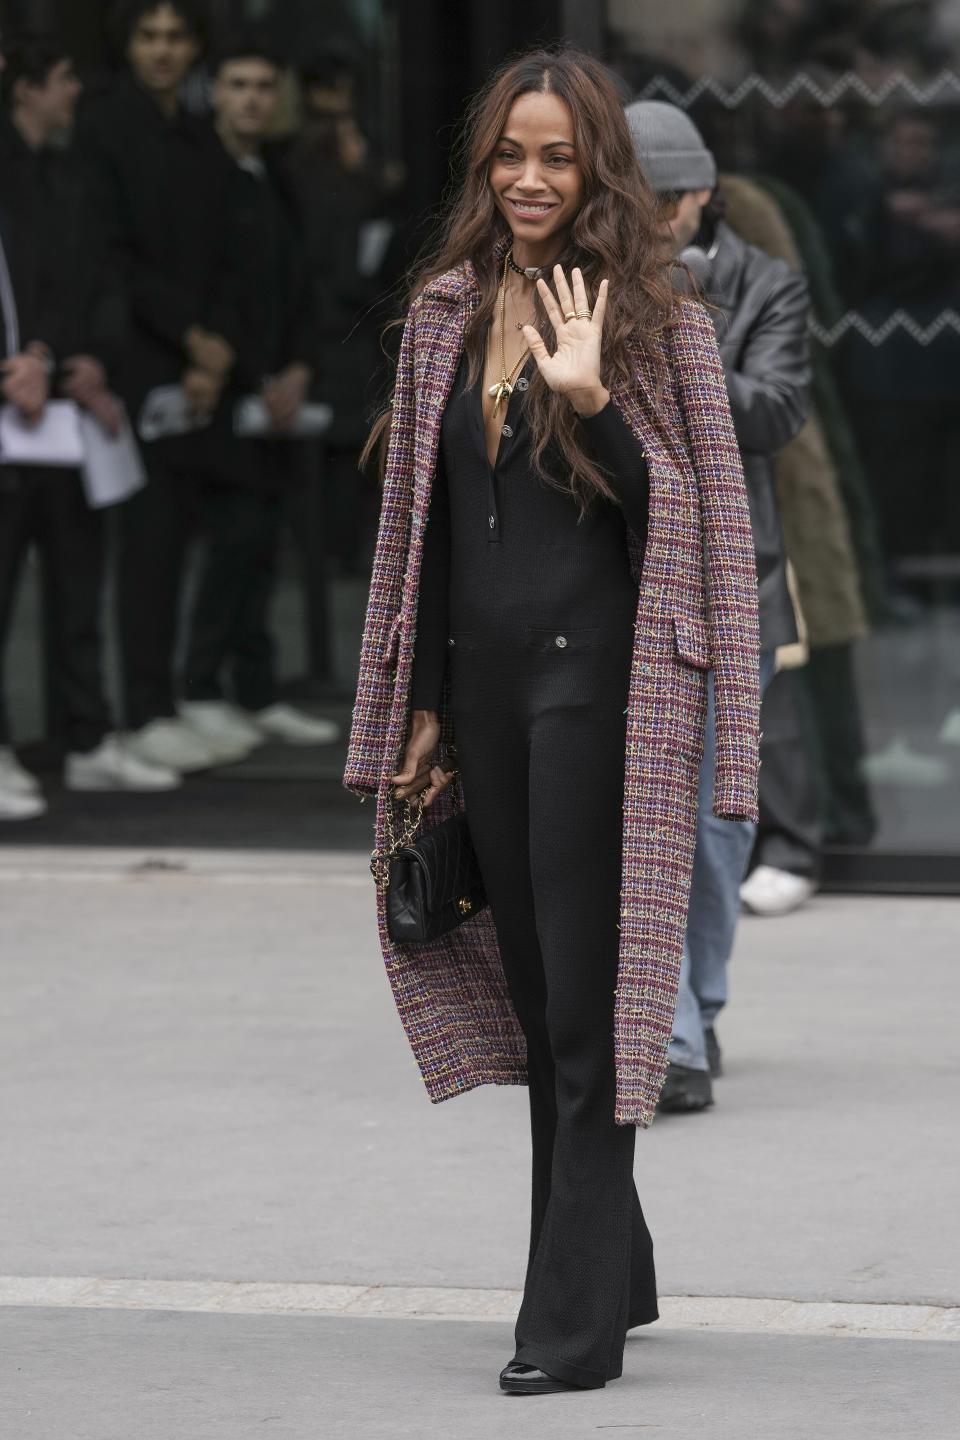 Zoe Saldana attends the Chanel Fall/Winter 2023-2024 ready-to-wear collection presented Tuesday, March 7, 2023 in Paris. (Scott Garfitt/Invision/AP)